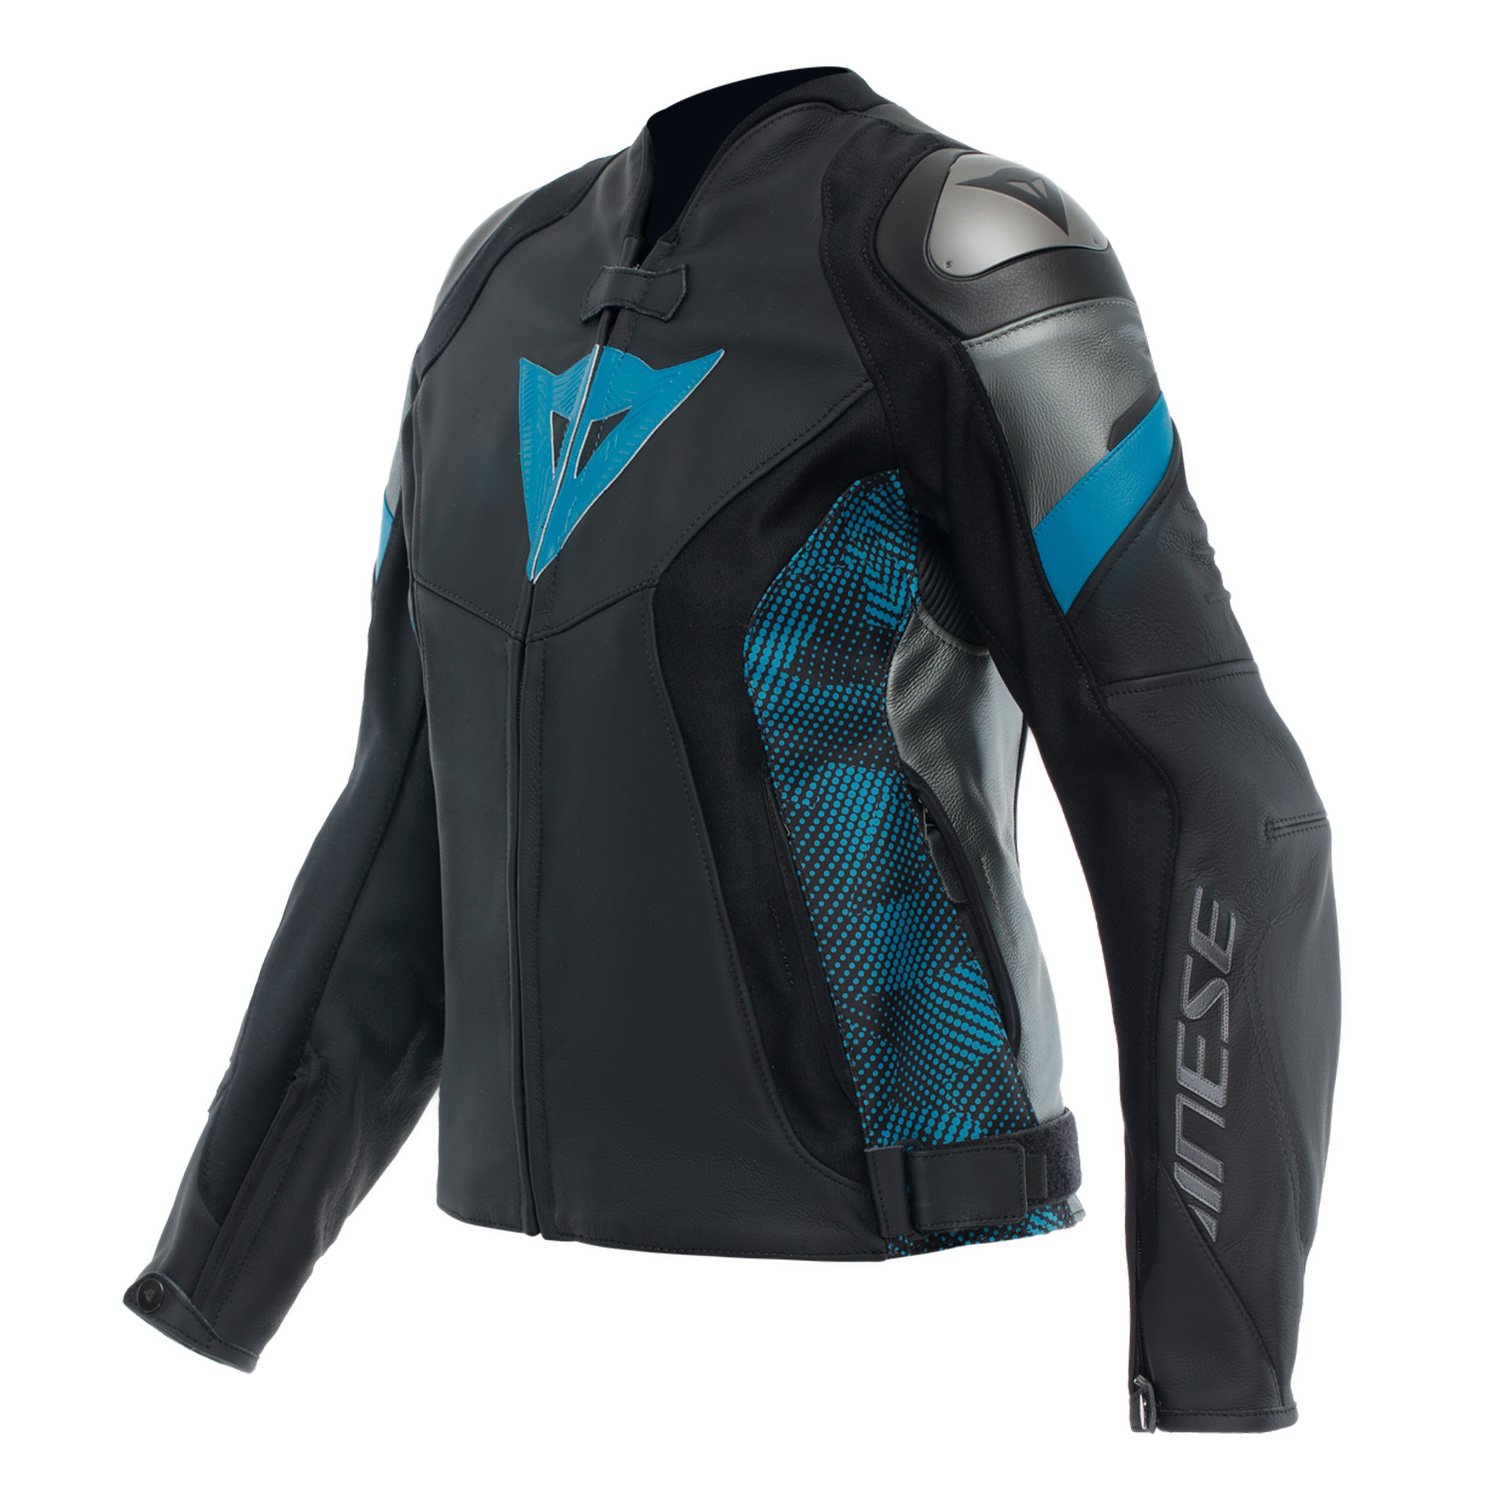 Image of EU Dainese Avro 5 Leather Jacket WMN Black Teal Anthracite Taille 40